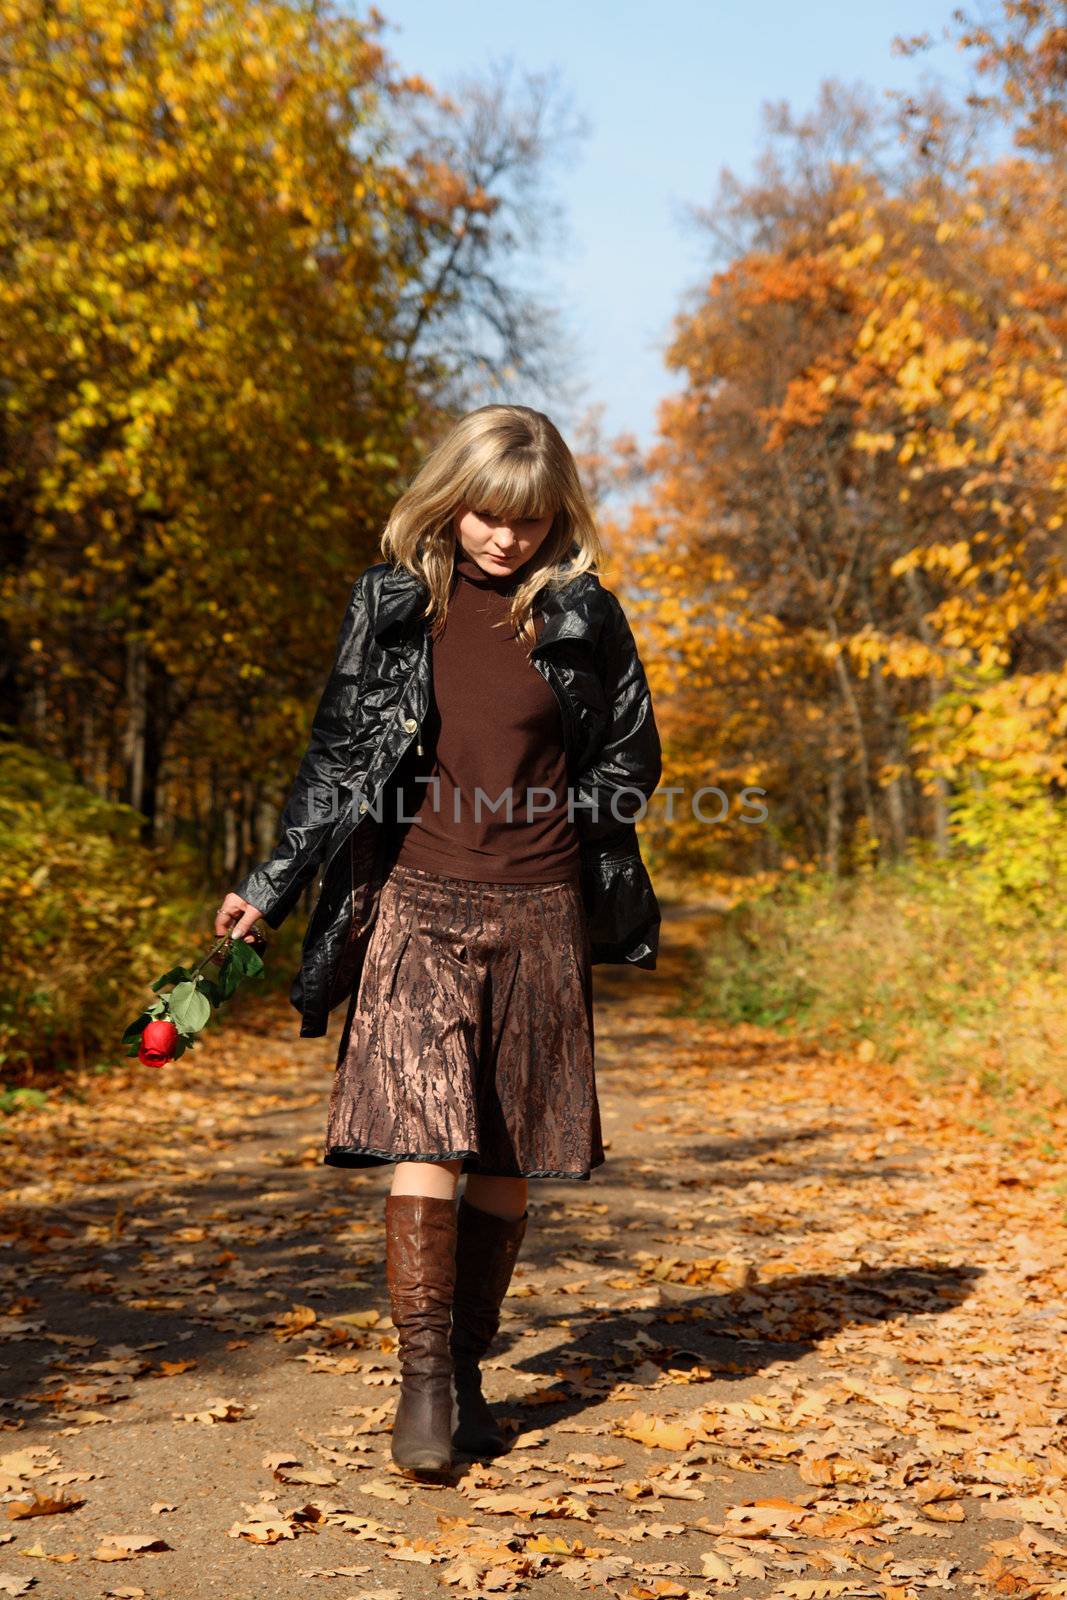 sadness girl with rose walking in autumn park